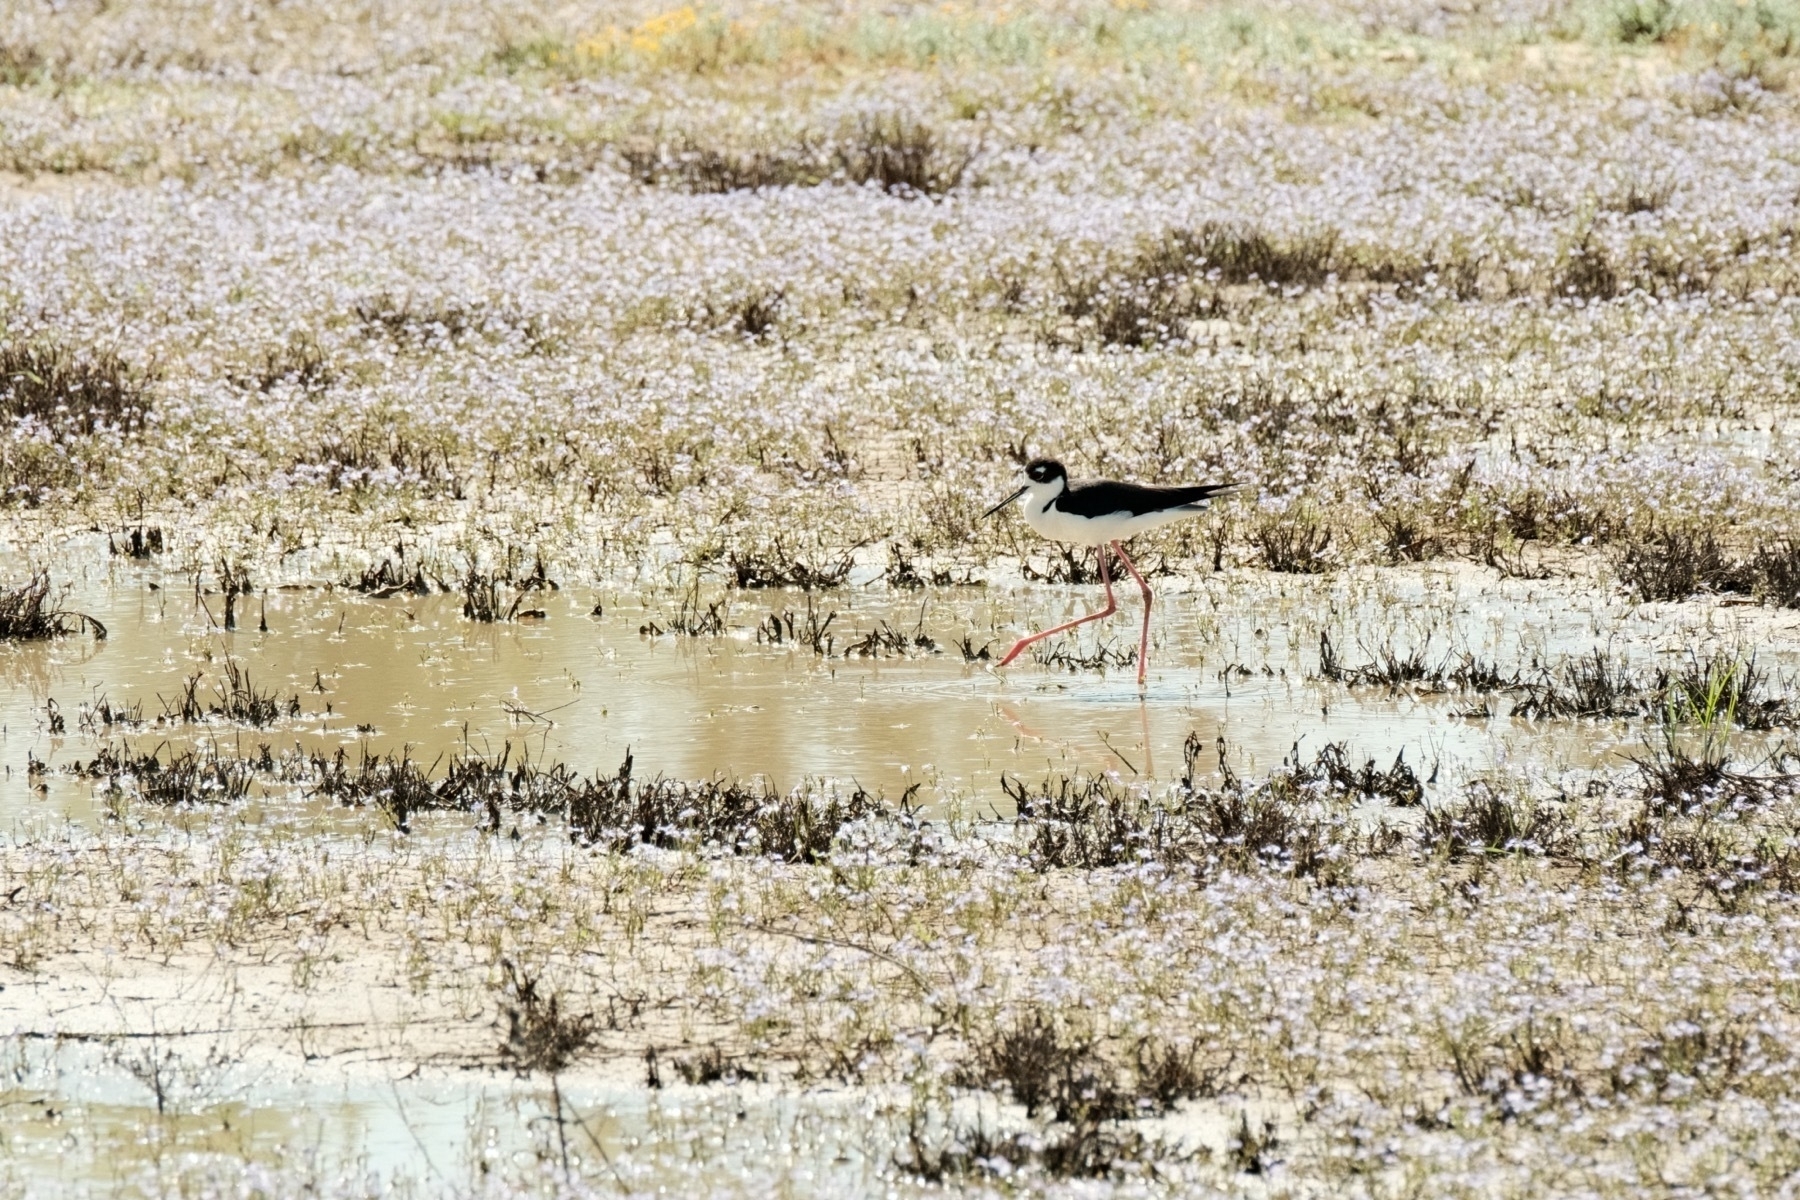 A Black-necked Stilt bird is waking through a shallow brown pond. Small forbs surround the pond, including low laying purple flowers and then, further in the background, yellow flowers. The Black-necked Stilt has a all-white underside and all-black back and top of head. It has long legs and a long black beak.